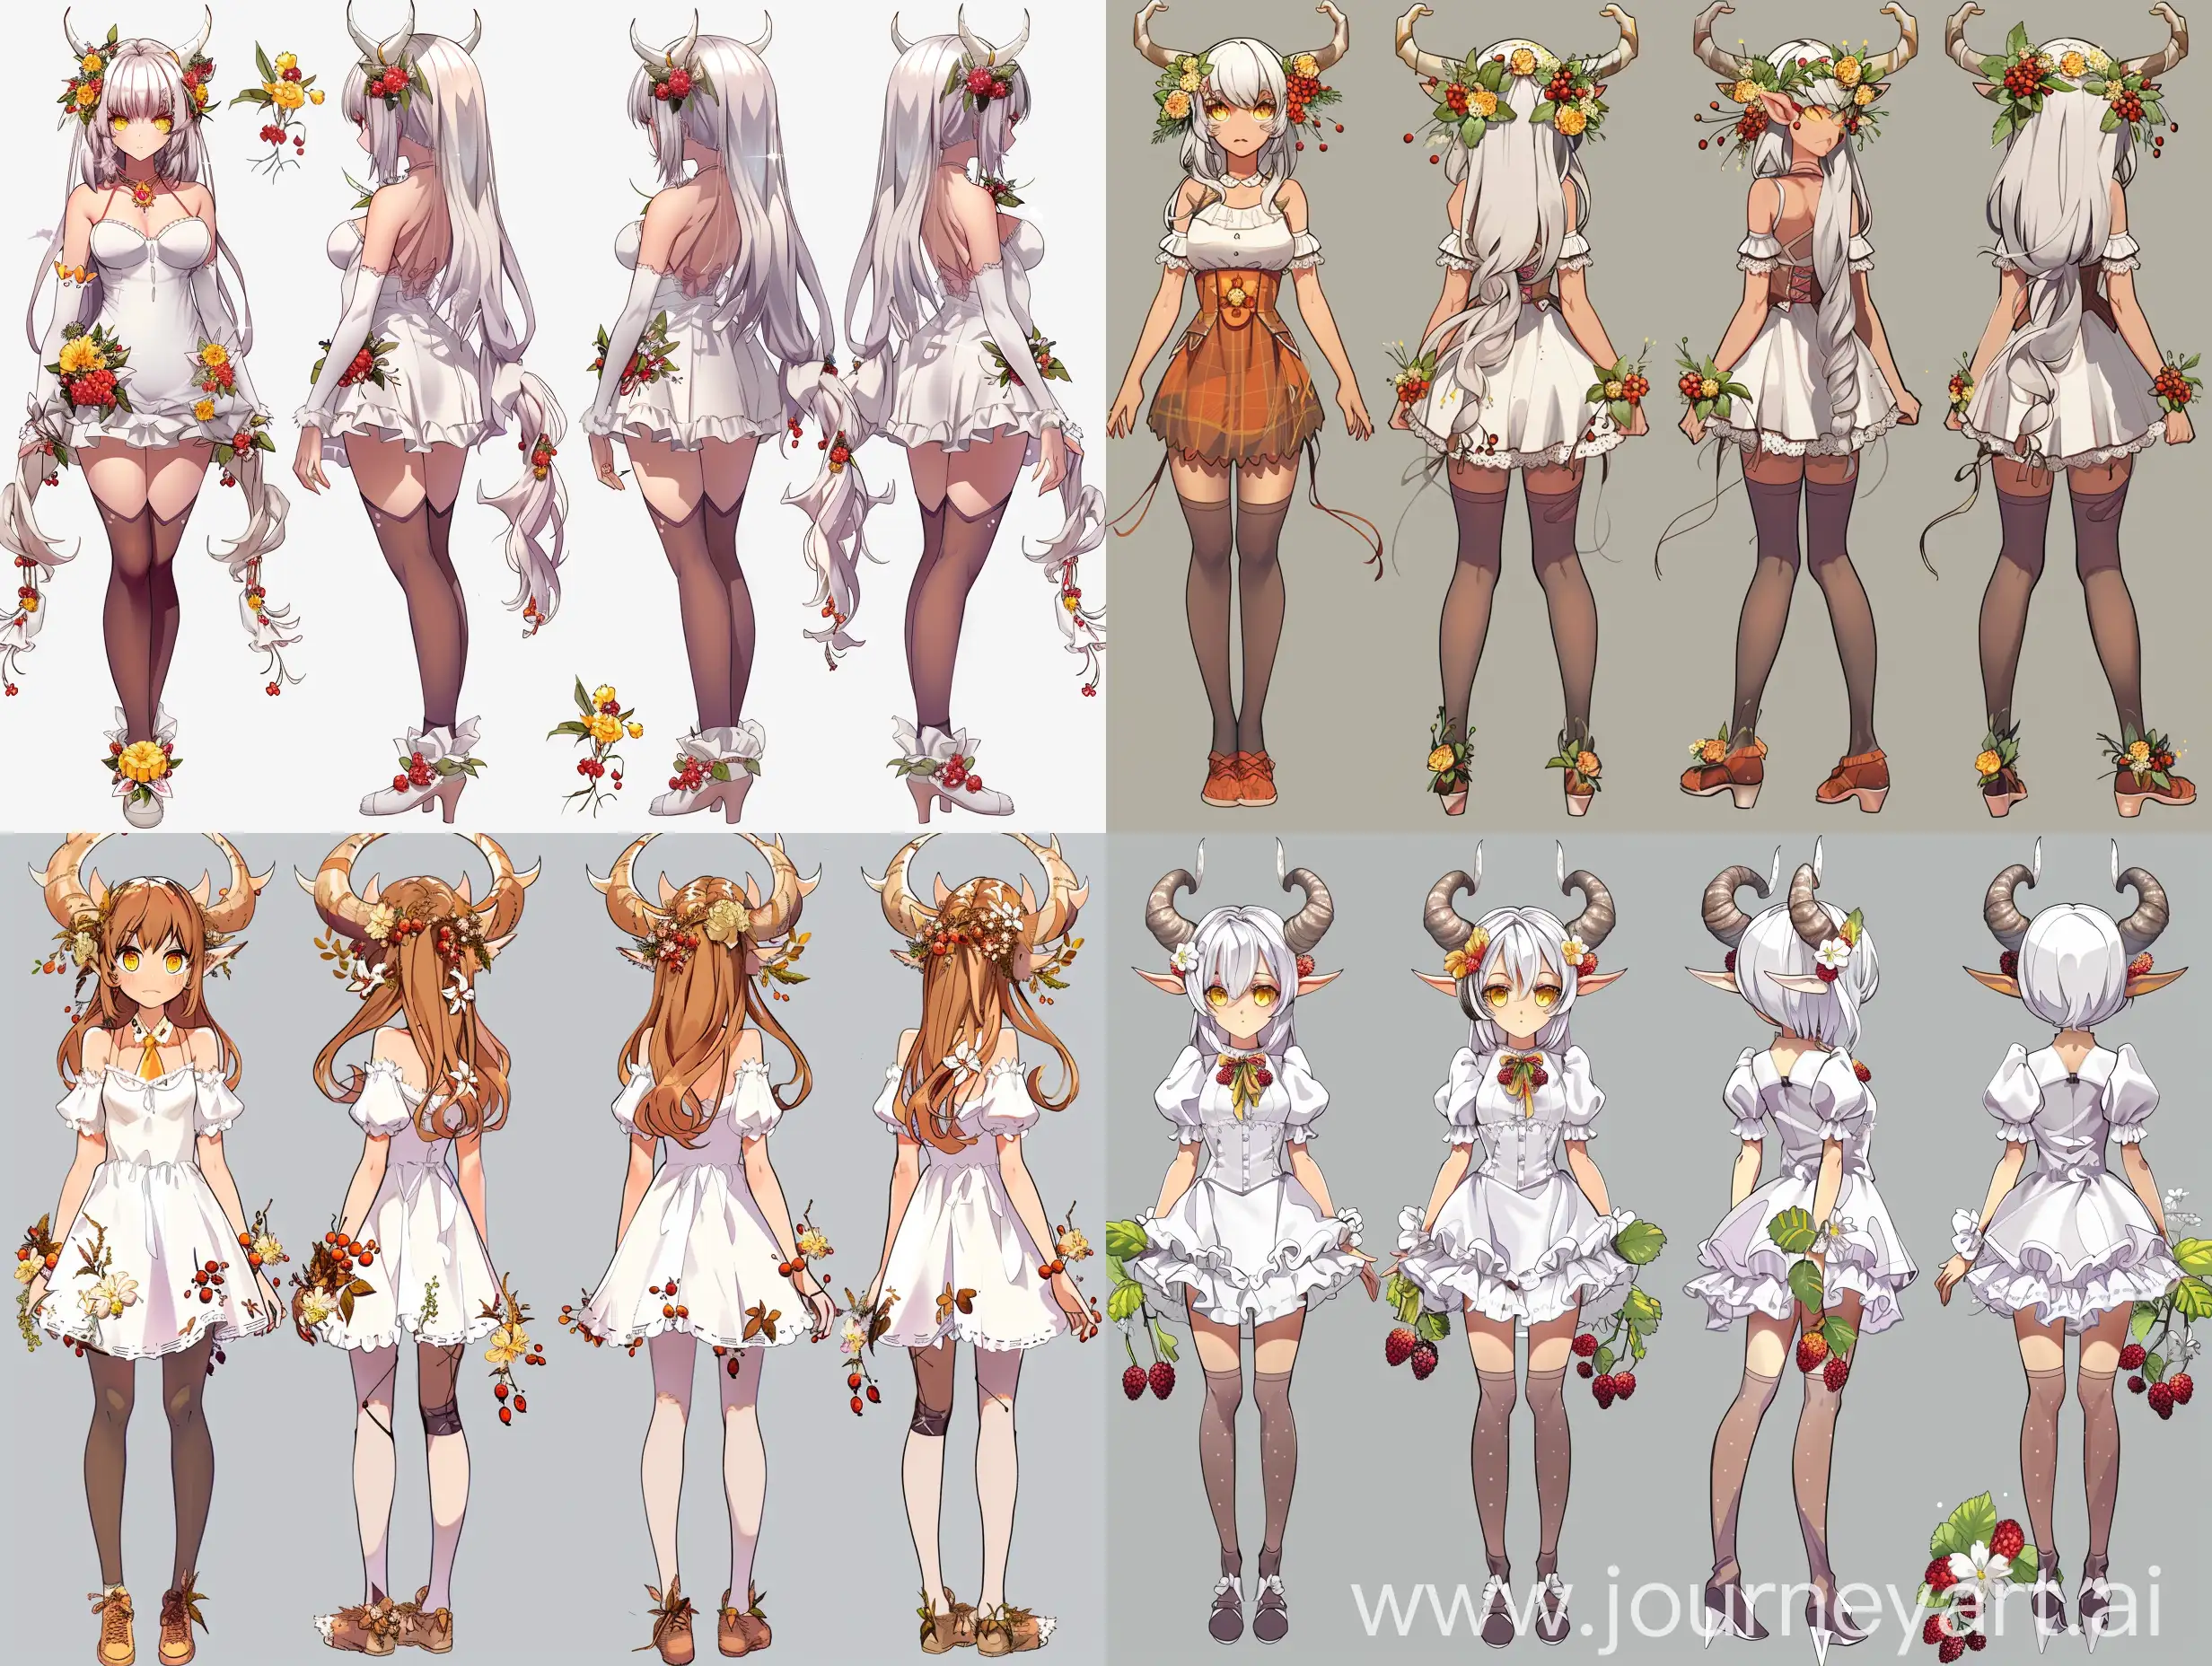 anime girl, character sheet from all sides, full length, sh ep humanisation with horns, berries, flowers, tights, airy sleeves on dress, yellow eyes